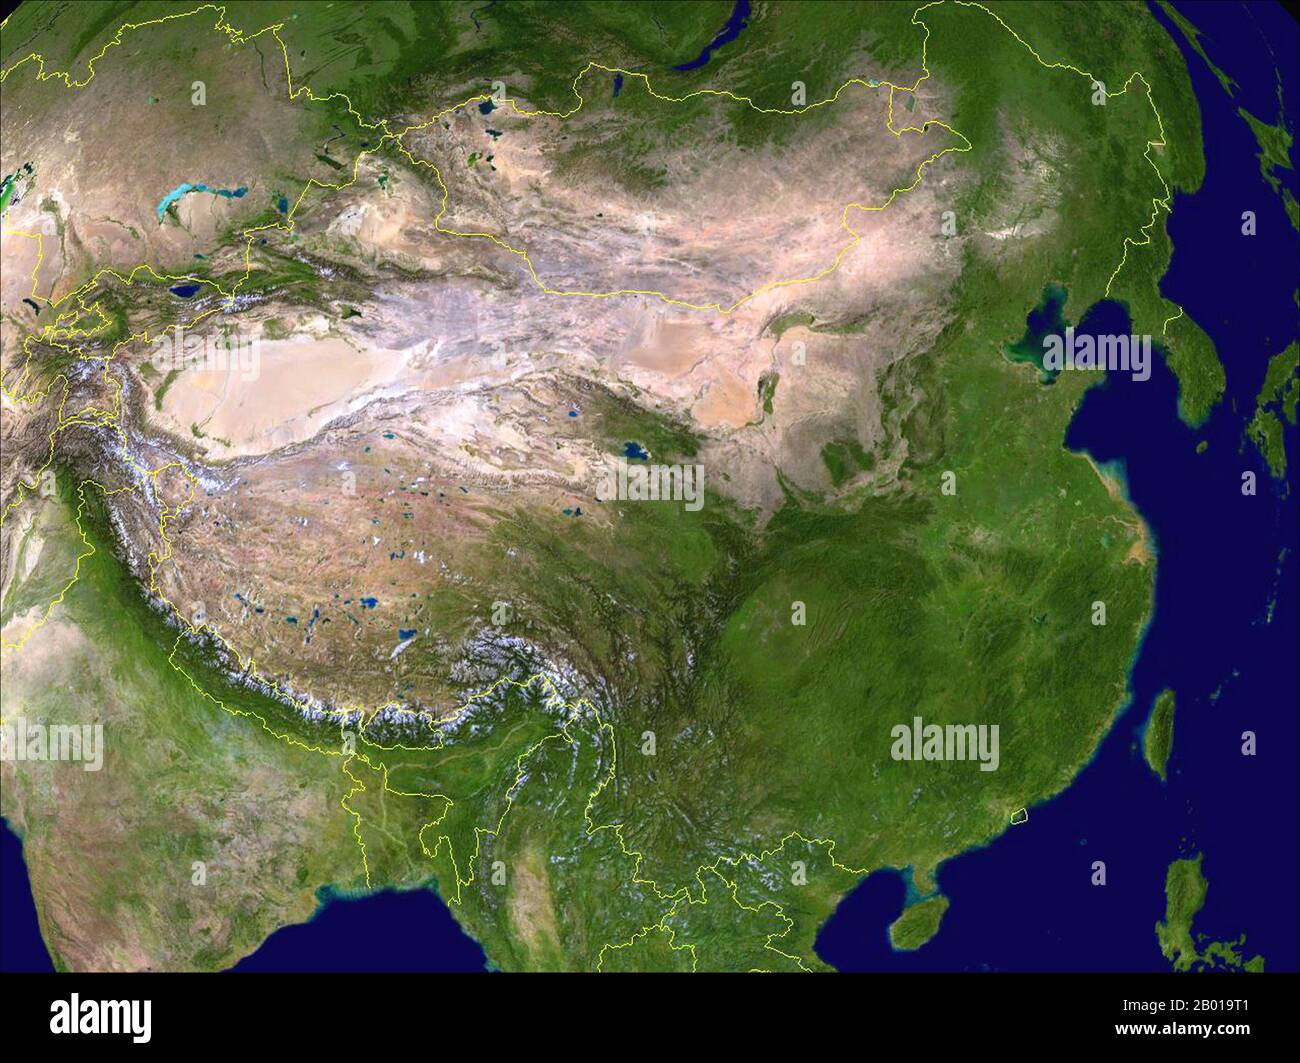 China: Composite Satellite image of China created by NASA and with contemporary frontiers superimposed in yellow, 30 March 2009.  China ranges from mostly plateaus and mountains in the west to lower lands in the east. Principal rivers flow from west to east, including the Yangtze (central), the Yellow River (Huang He, north-central), and the Amur (northeast), and sometimes toward the south (including the Pearl River, Mekong (river), and Brahmaputra), with most Chinese rivers emptying into the Pacific Ocean. Stock Photo